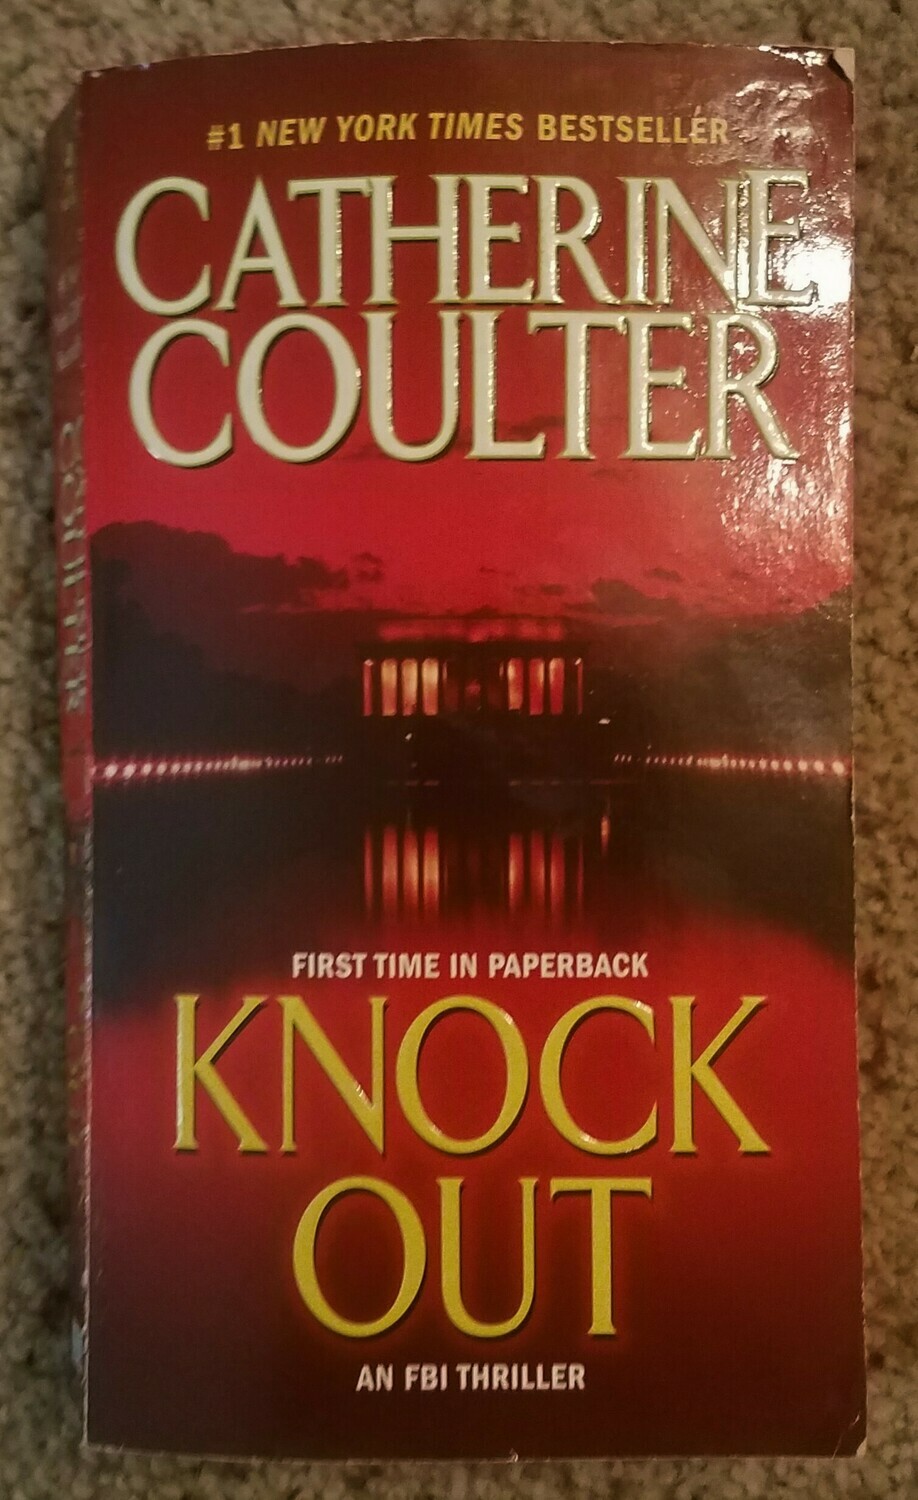 Knock Out by Catherine Coulter